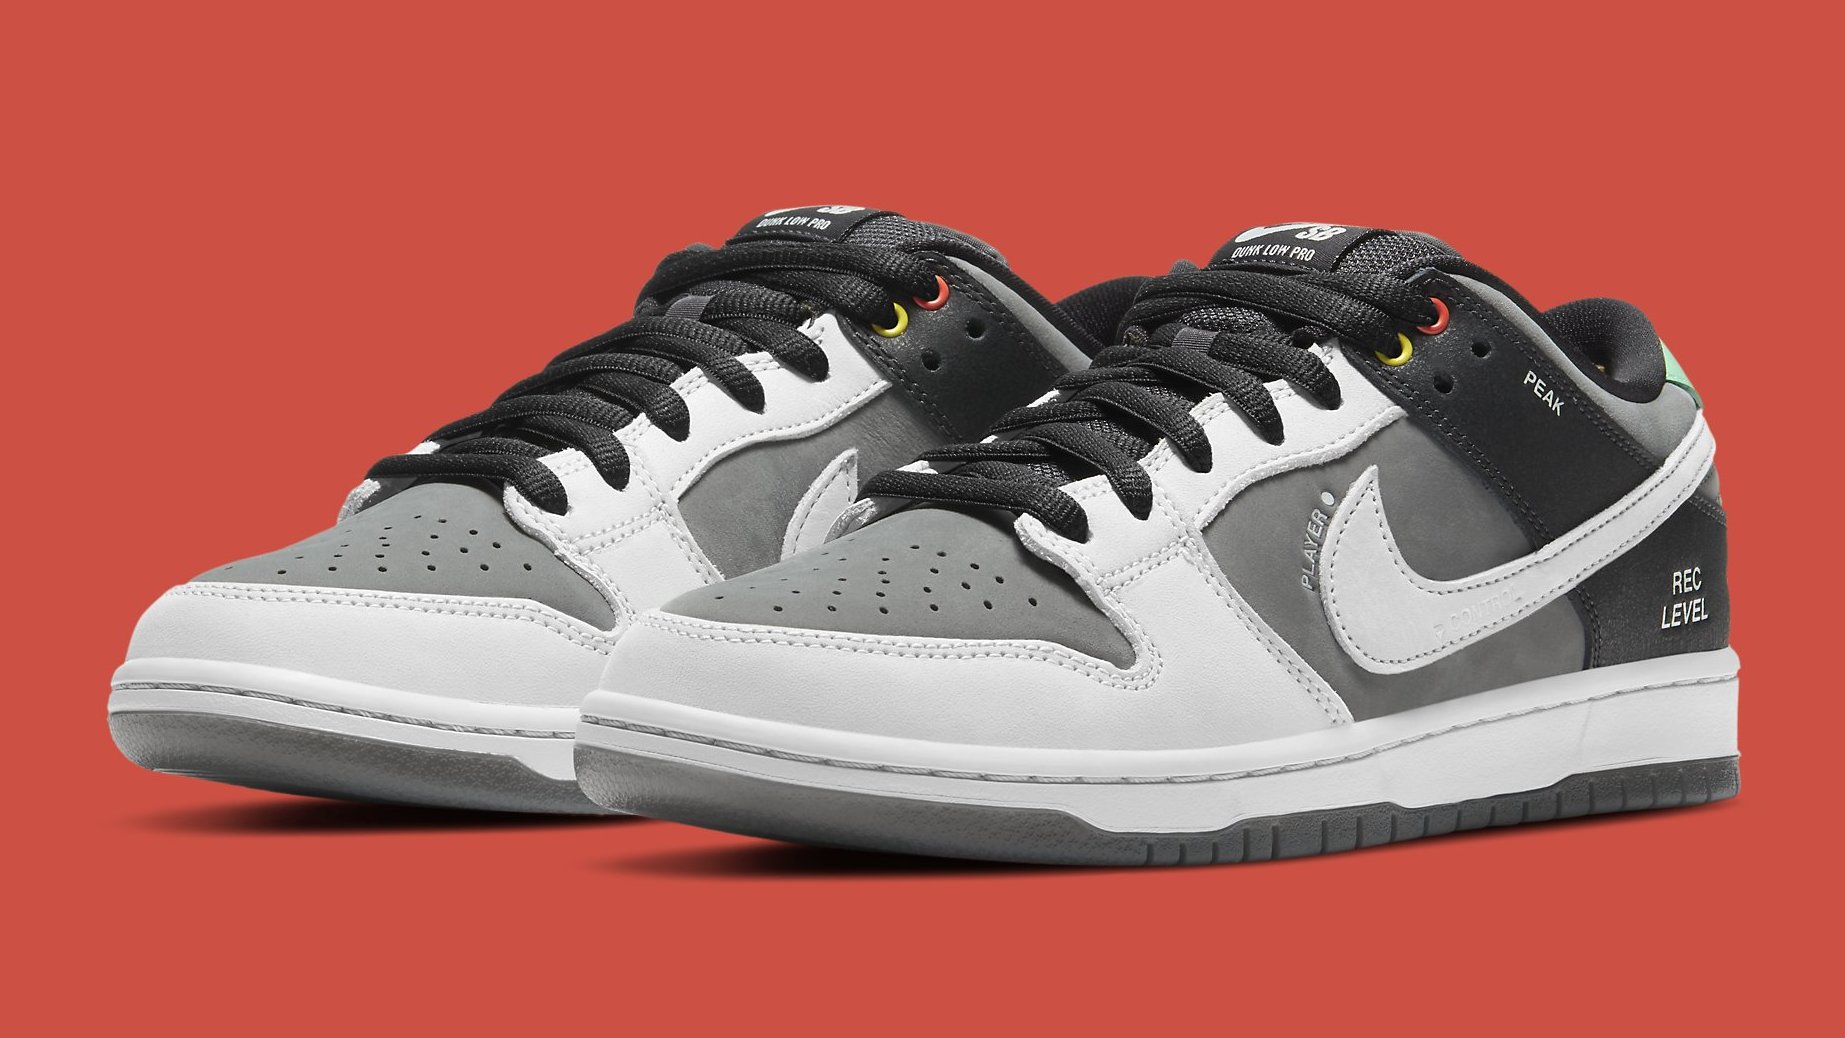 Nike SB Dunk Inspired by a Skateboarding Staple | Complex